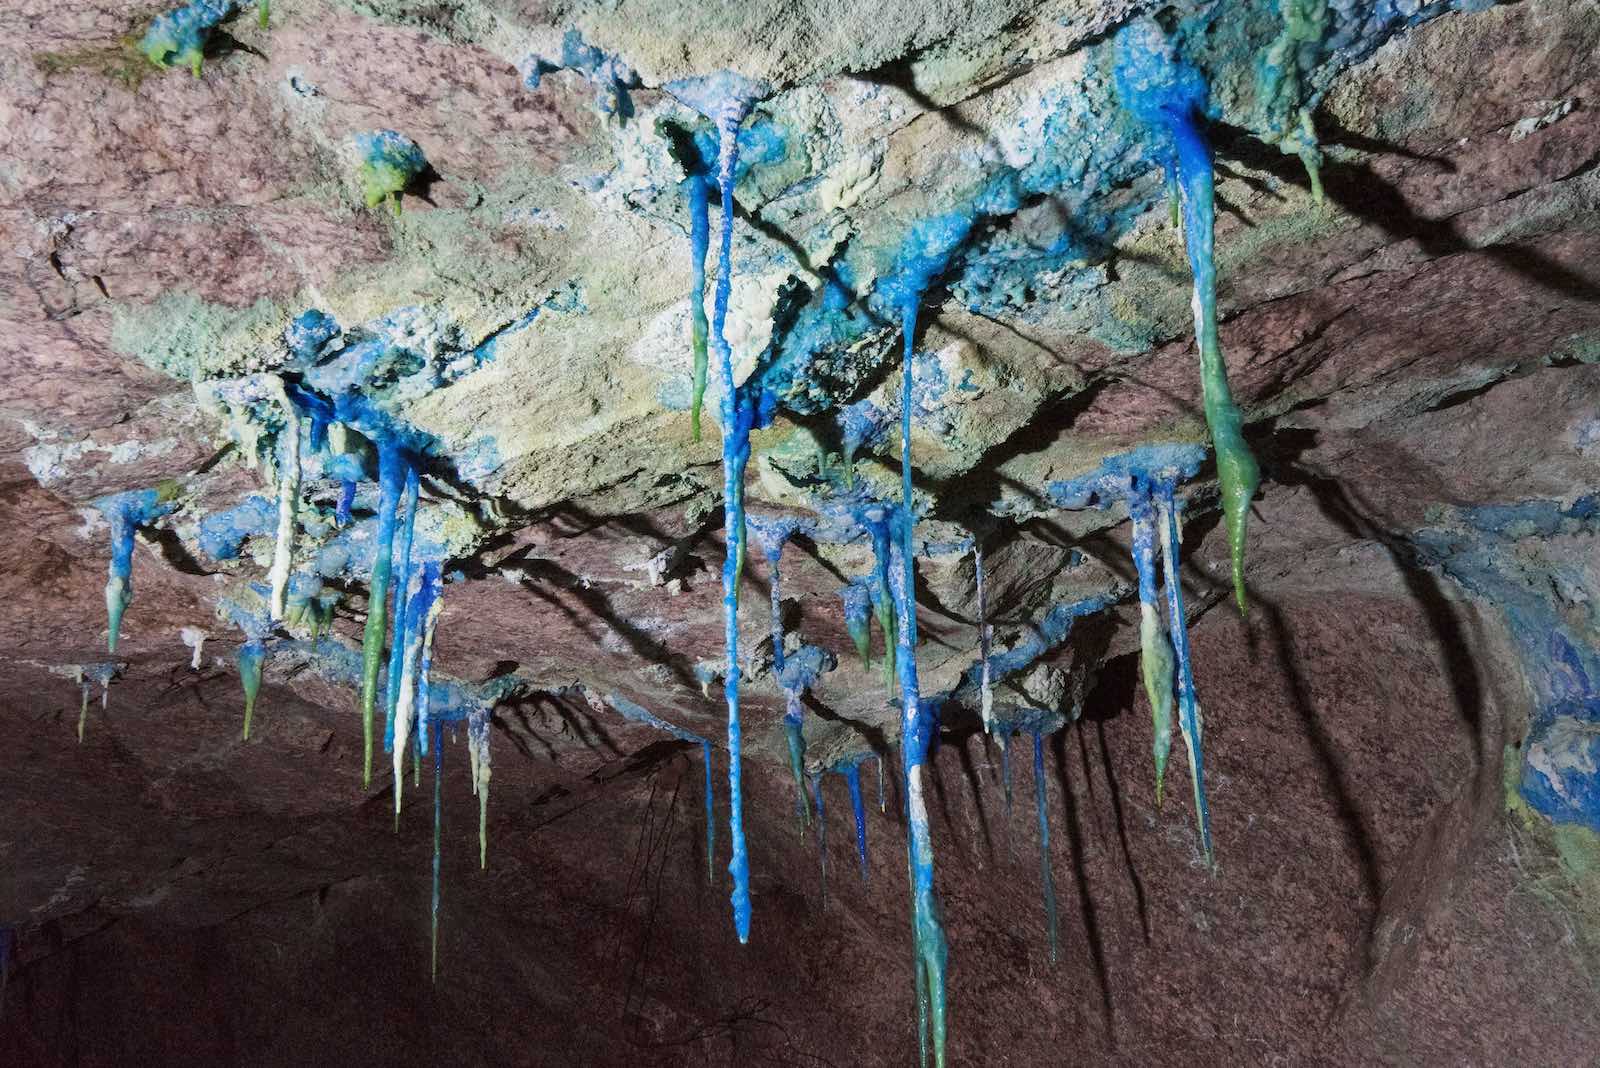 Copper shows on stalactites in a rare-earth mine (Photo: Rodger Bosch/AFP/Getty)